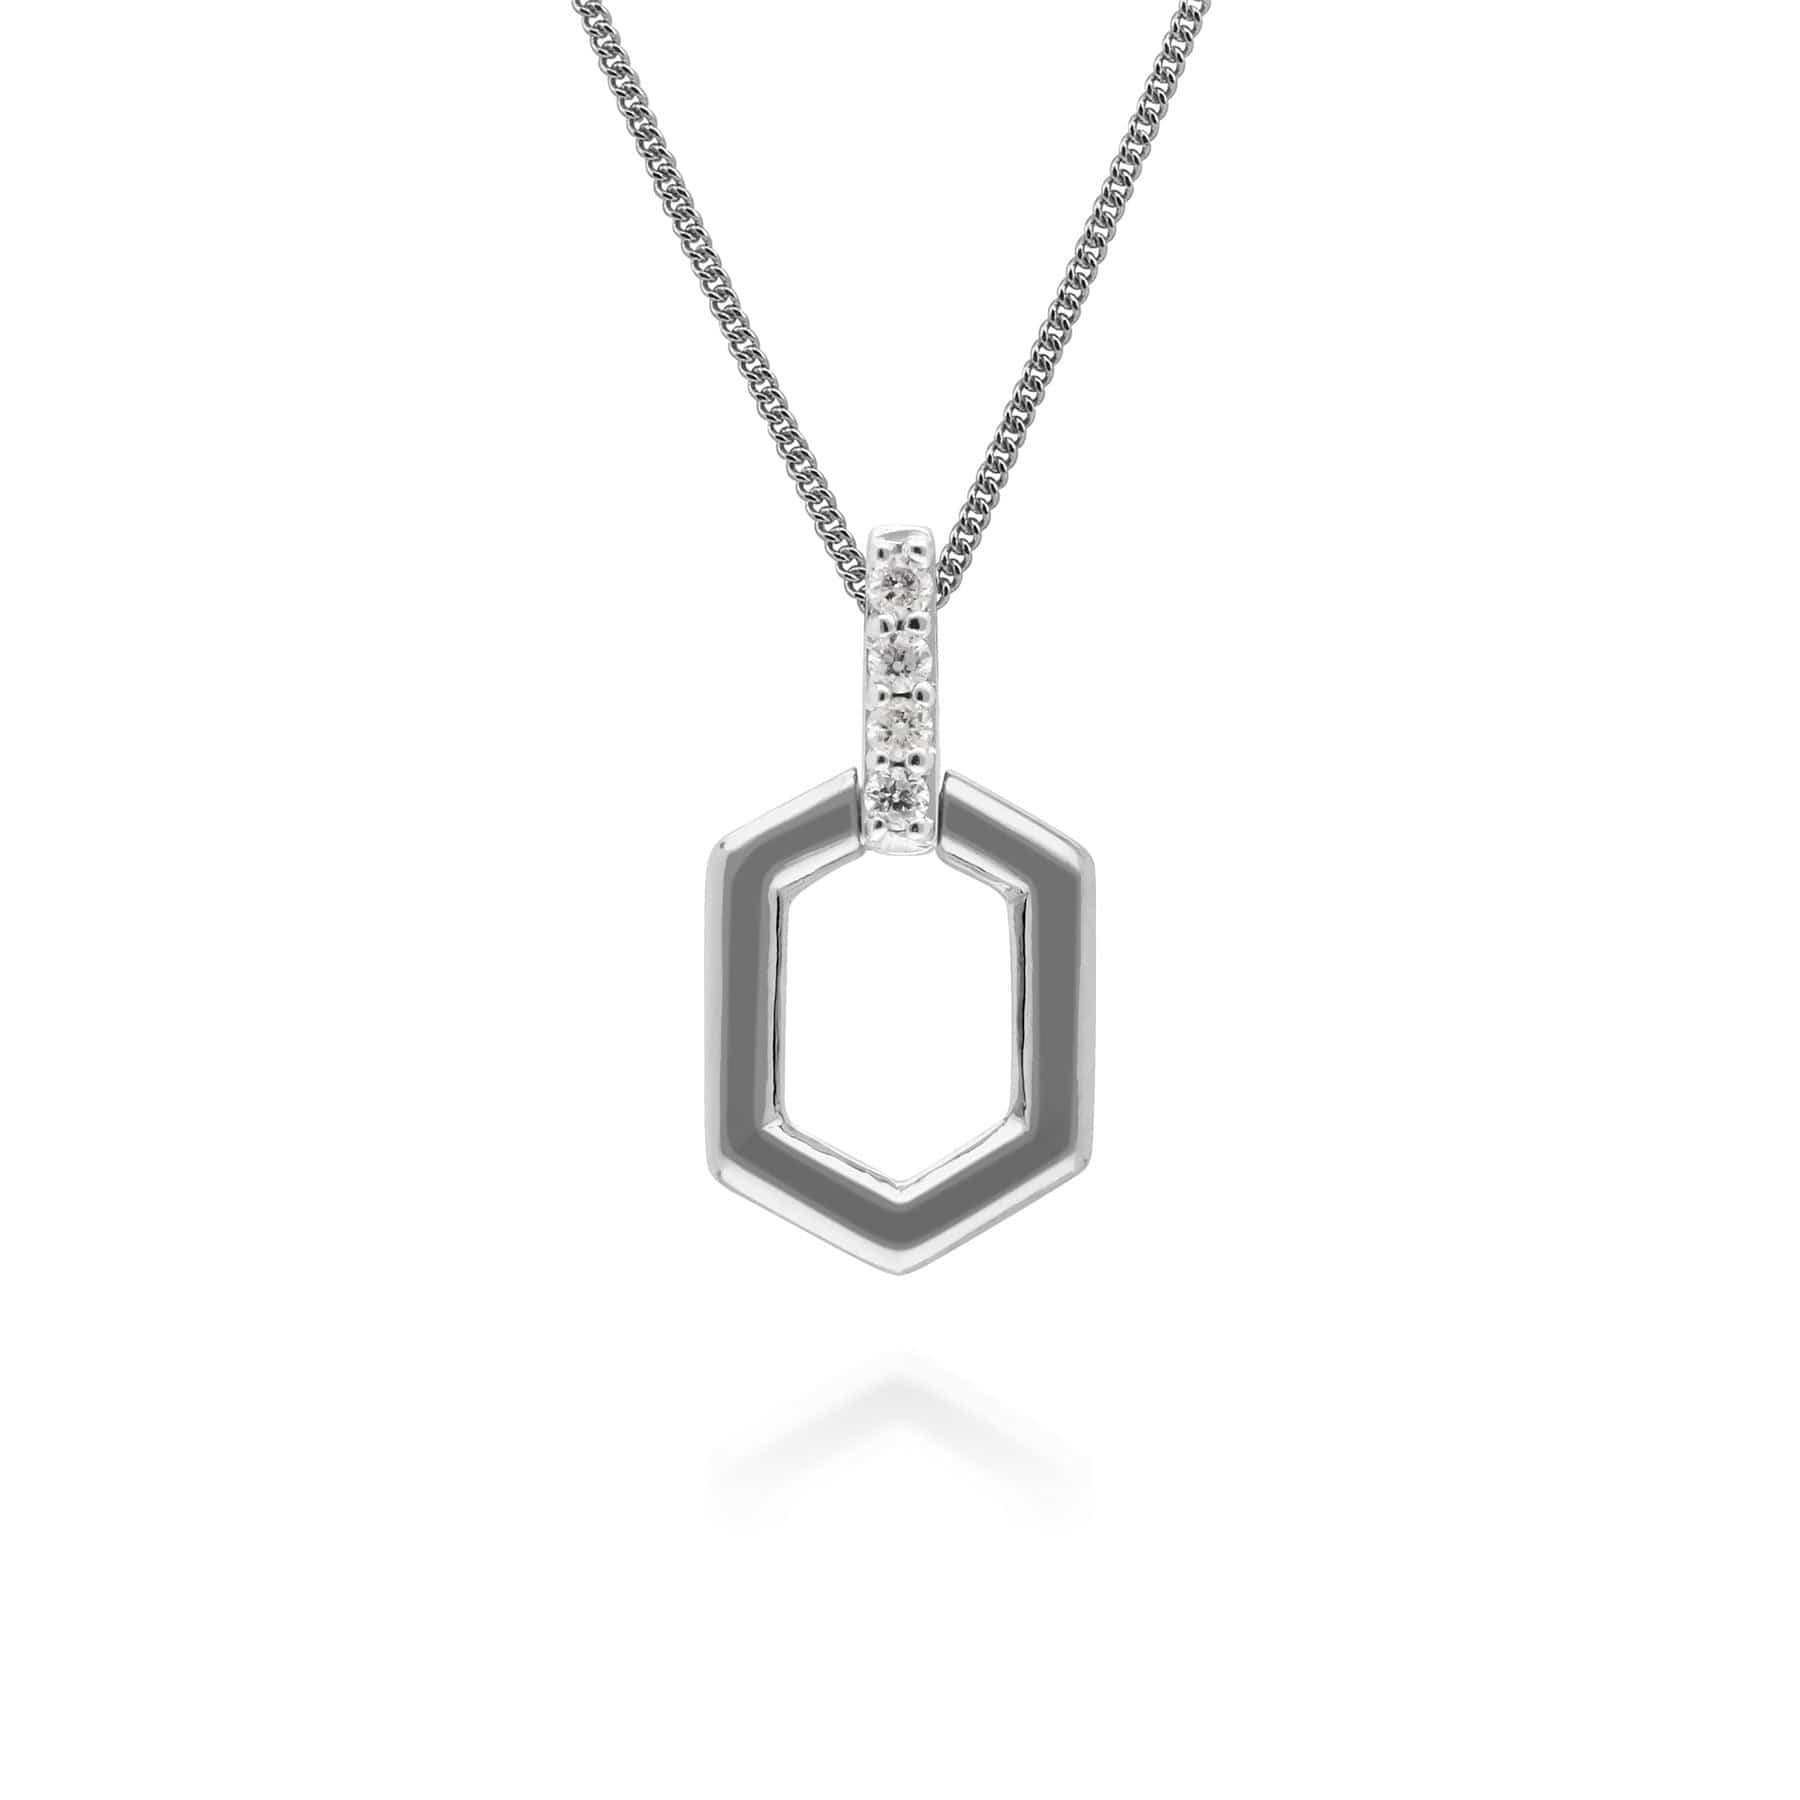 Diamond Pave Hex Bar Pendant Necklace in 9ct White Gold